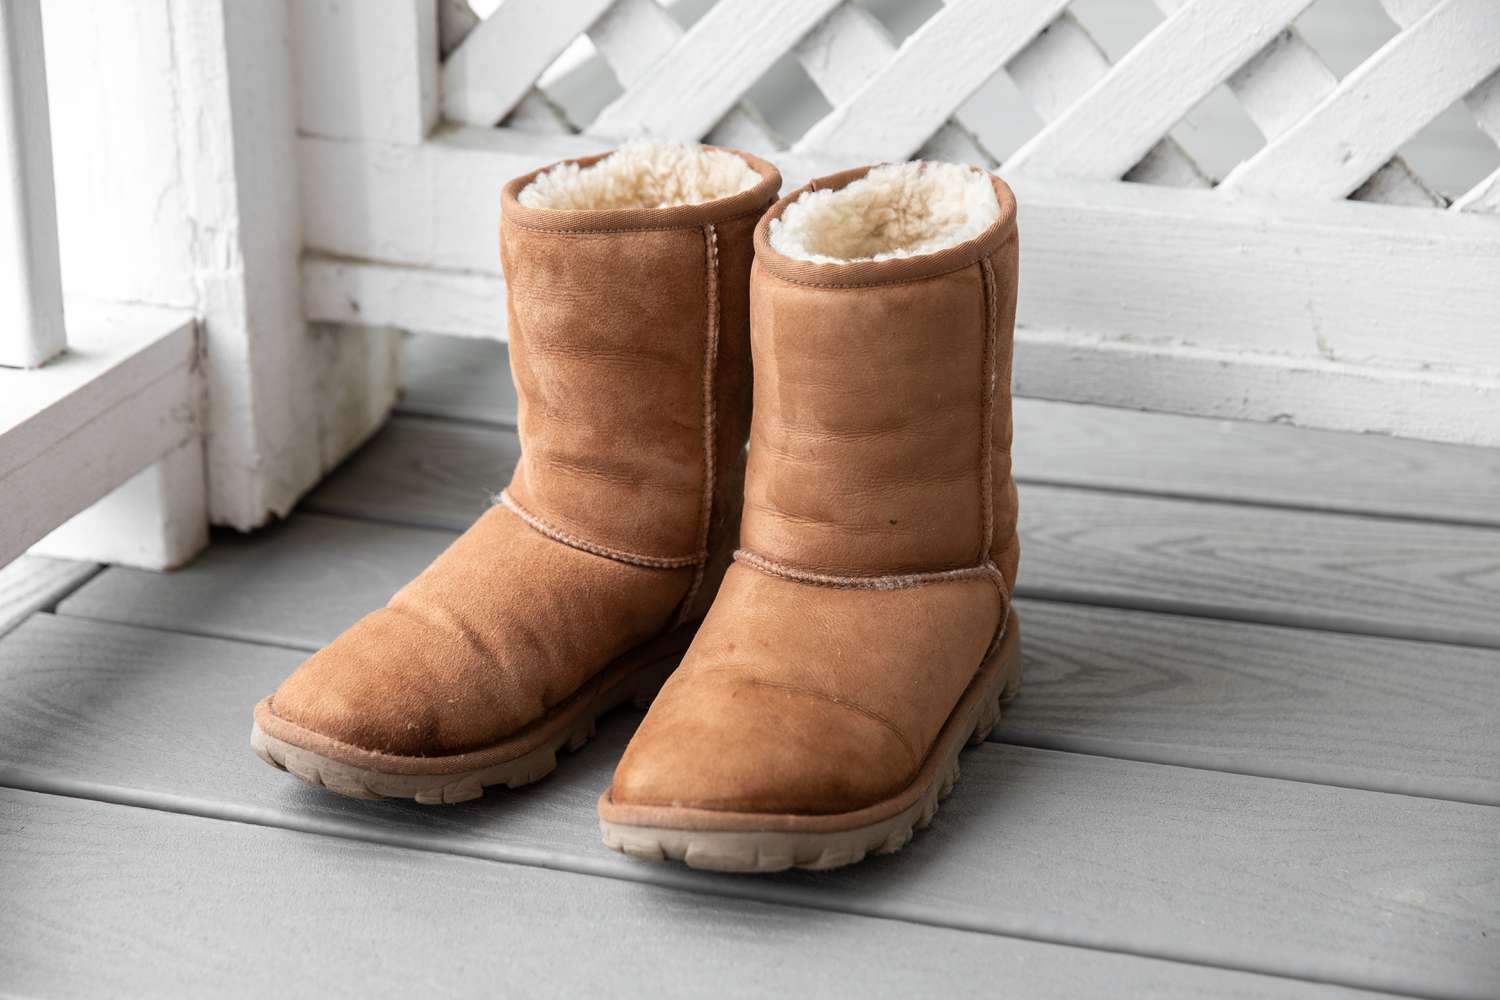 Air drying Ugg boots